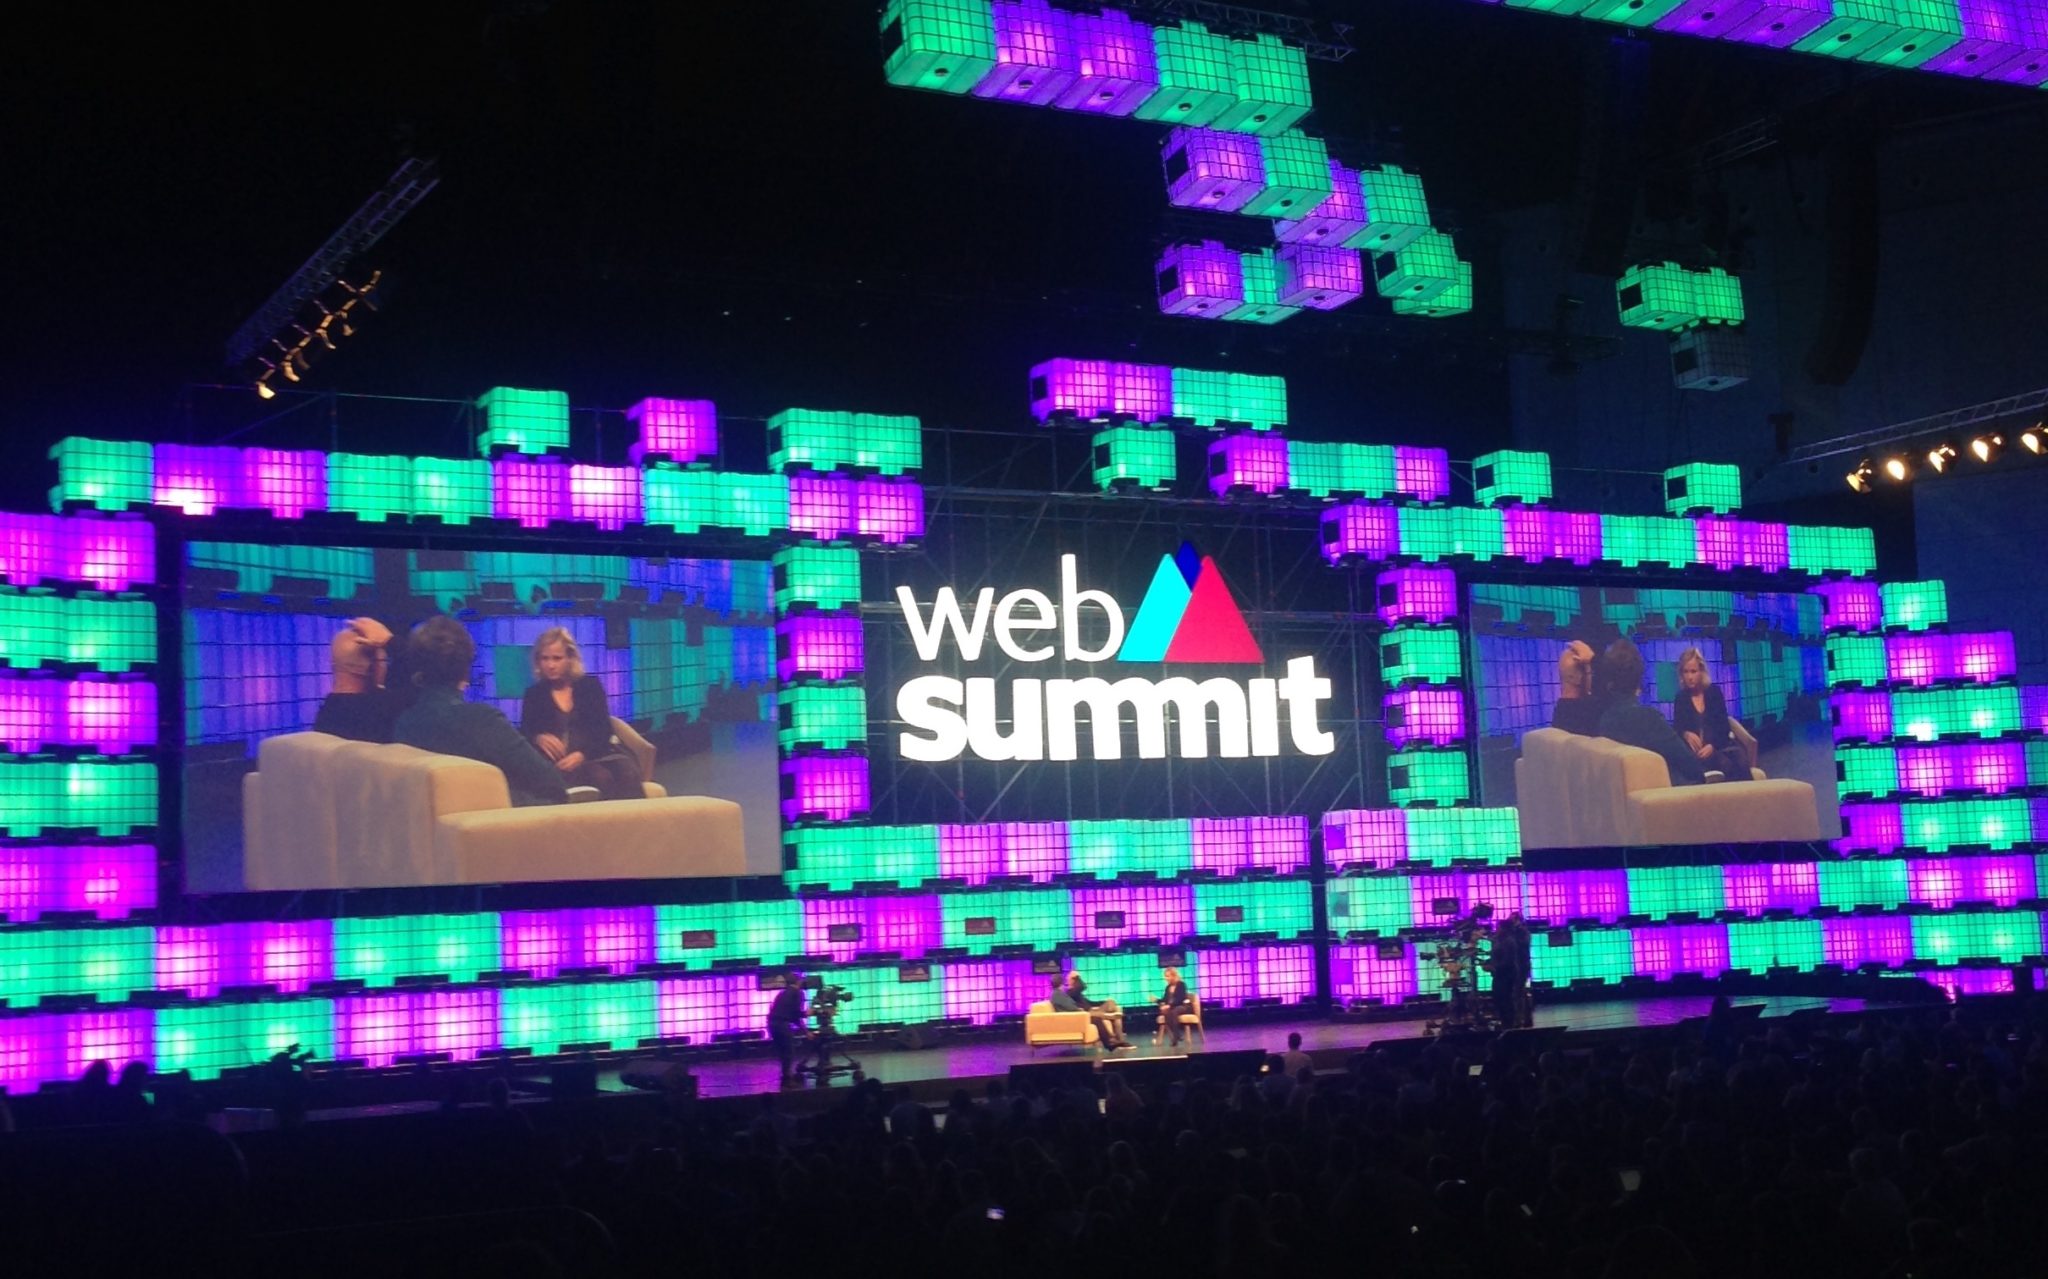 8 lessons learnt from Web Summit 2017 - Delib